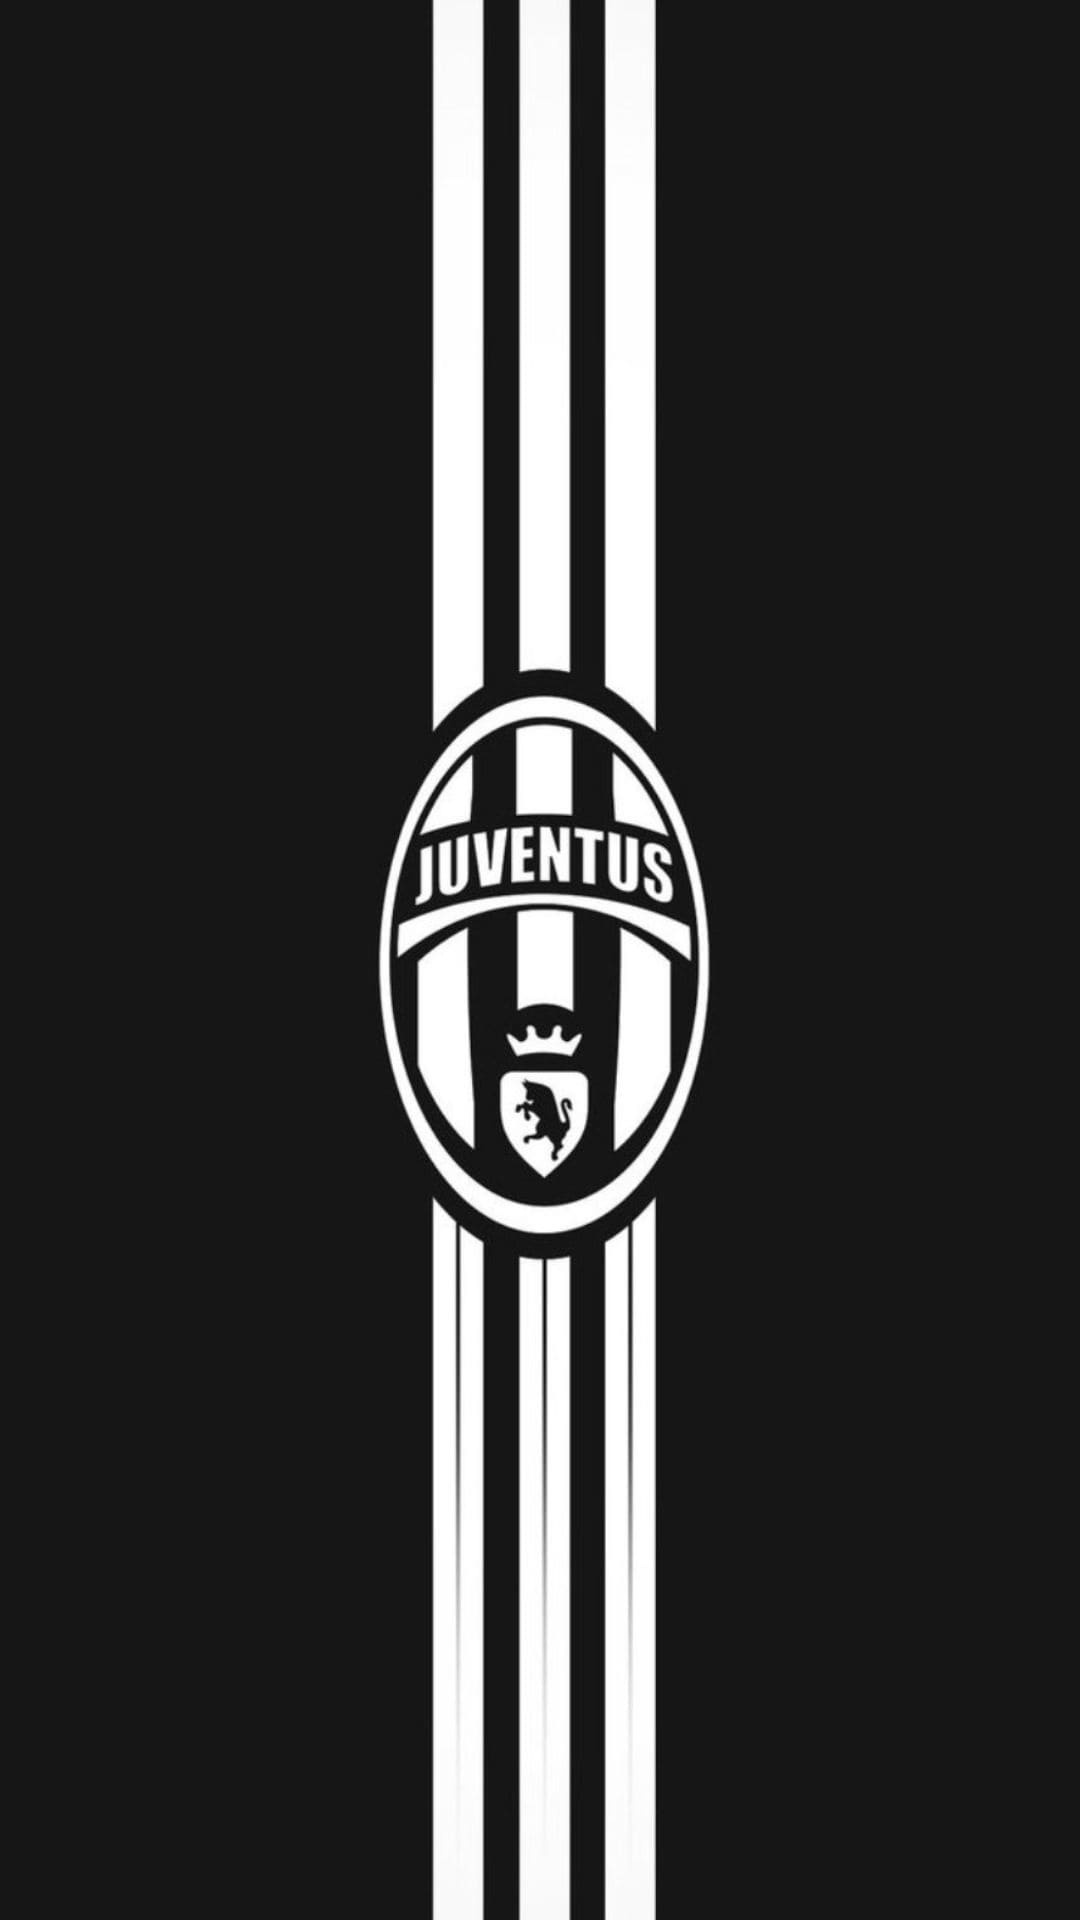 Juventus: The club's fan base is the largest at national level and one of the largest worldwide. 1080x1920 Full HD Background.